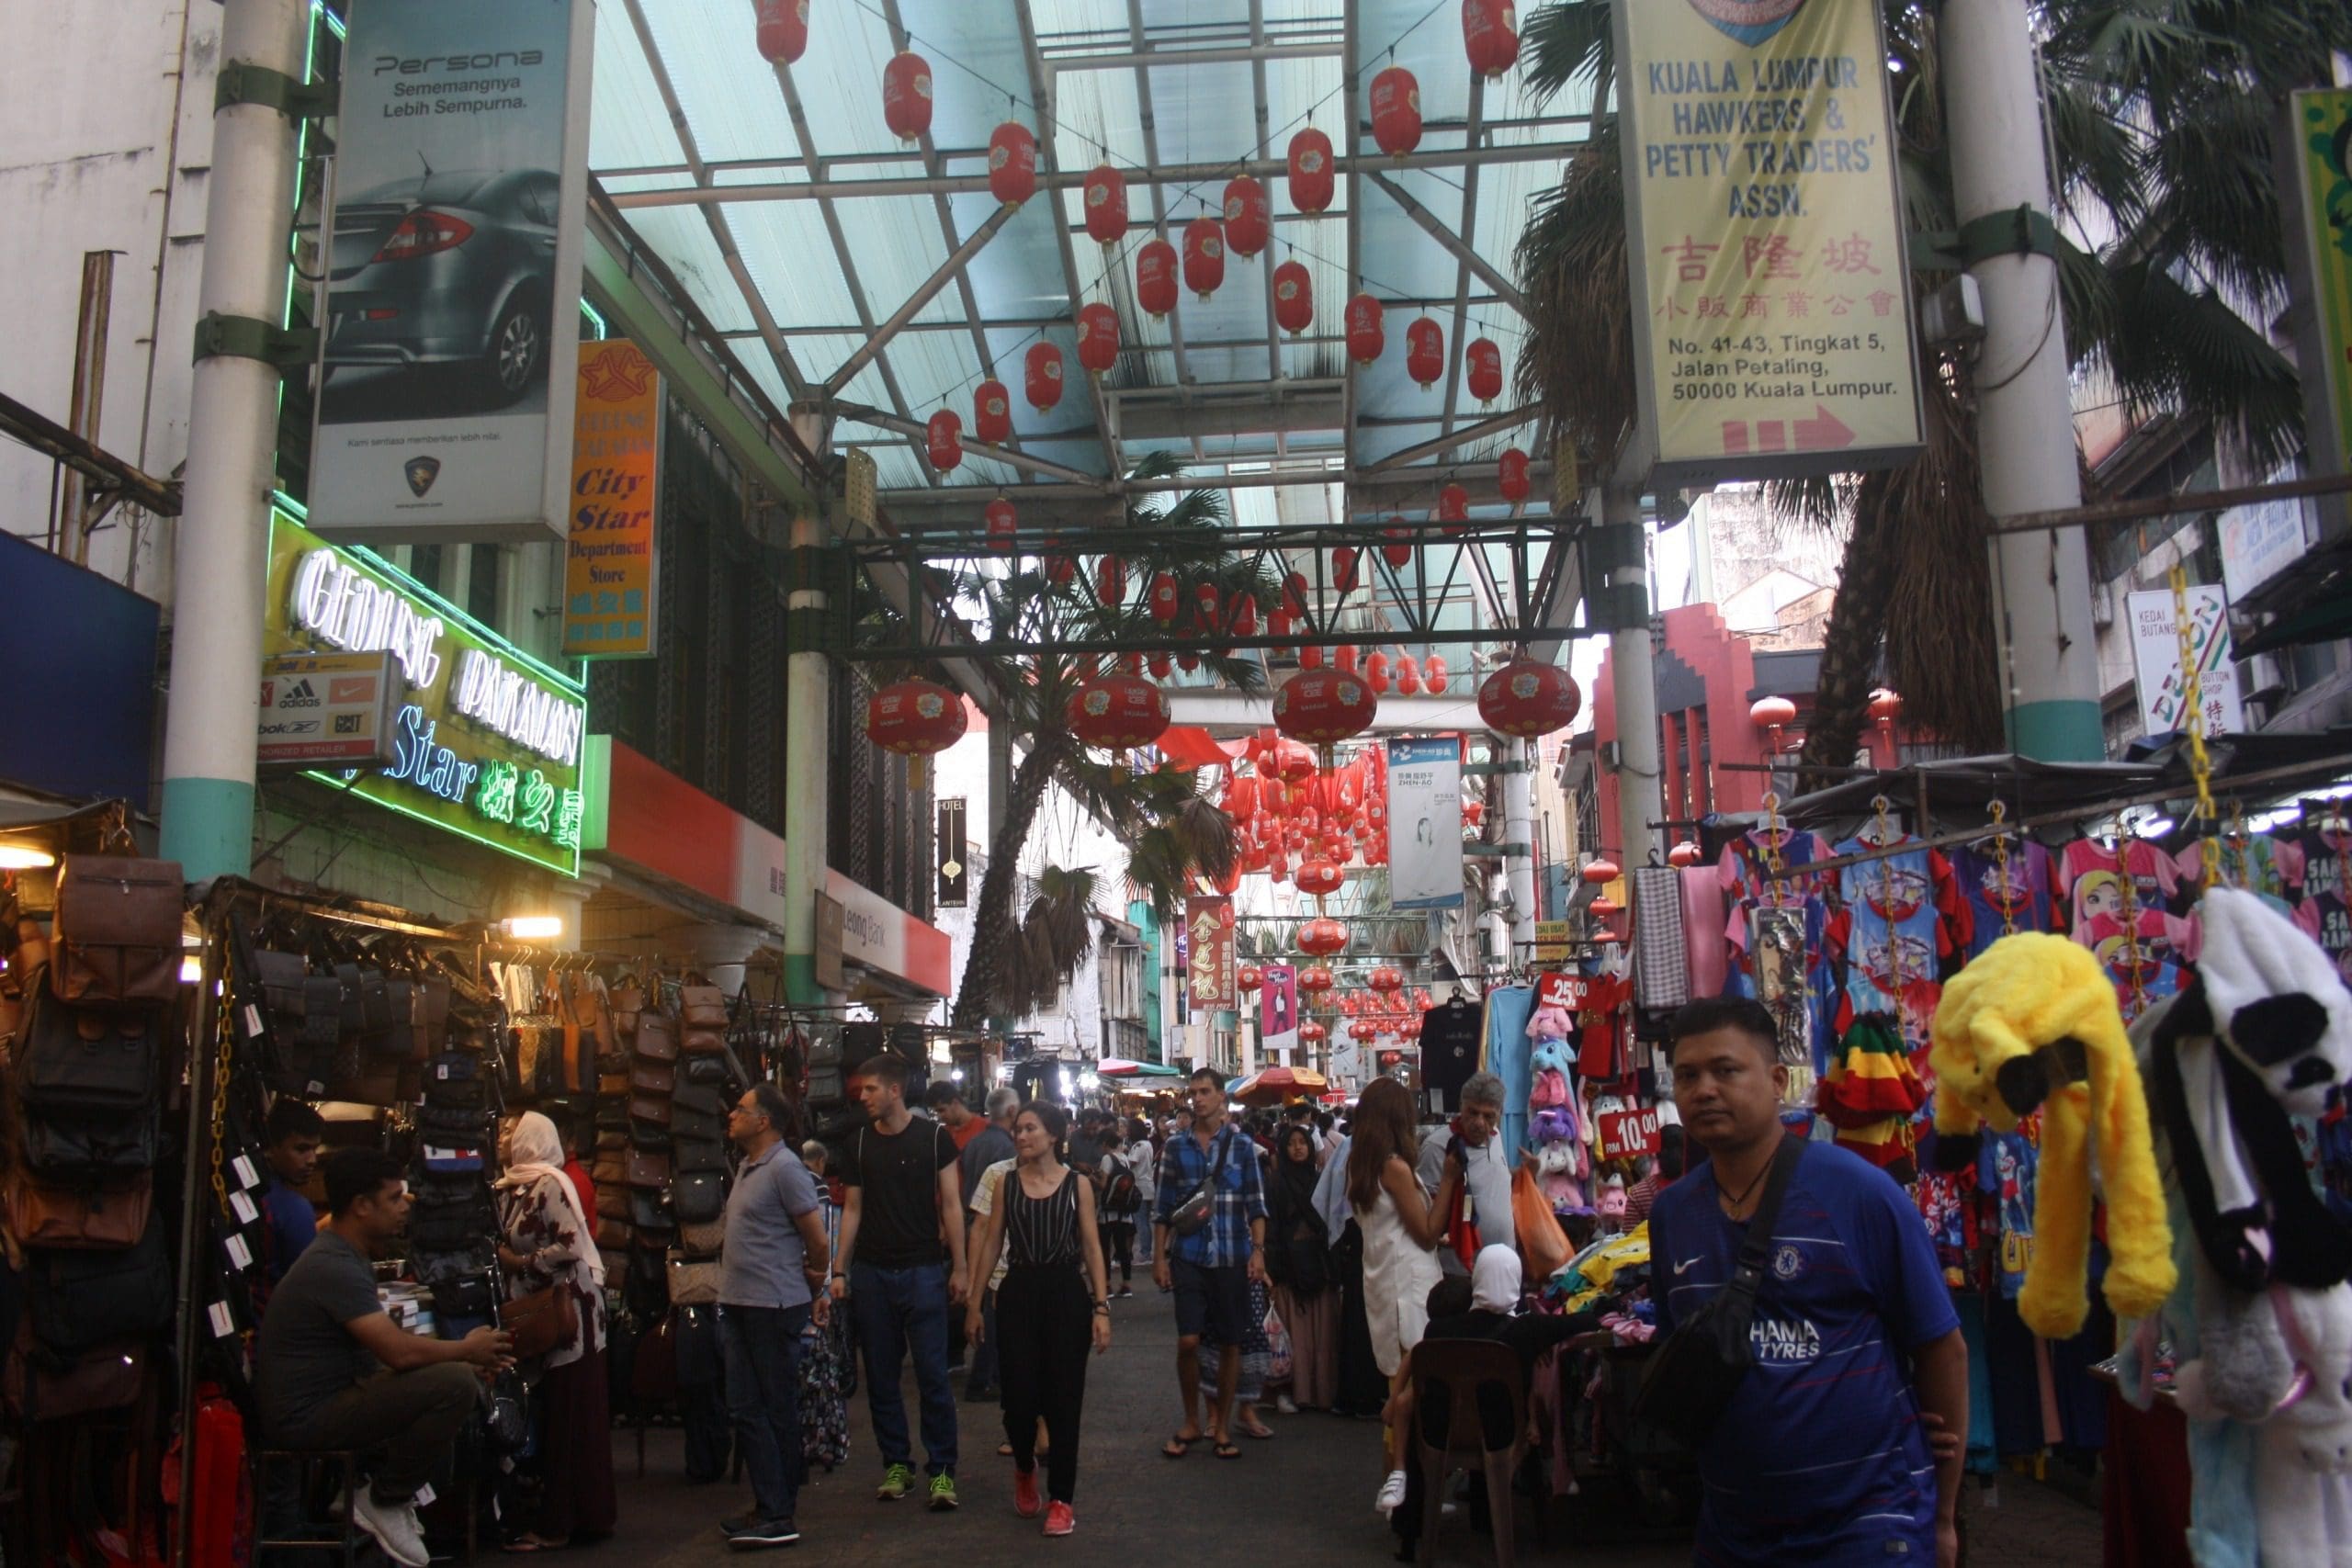 Petaling Street food and mrrkets, there is something for everyone!